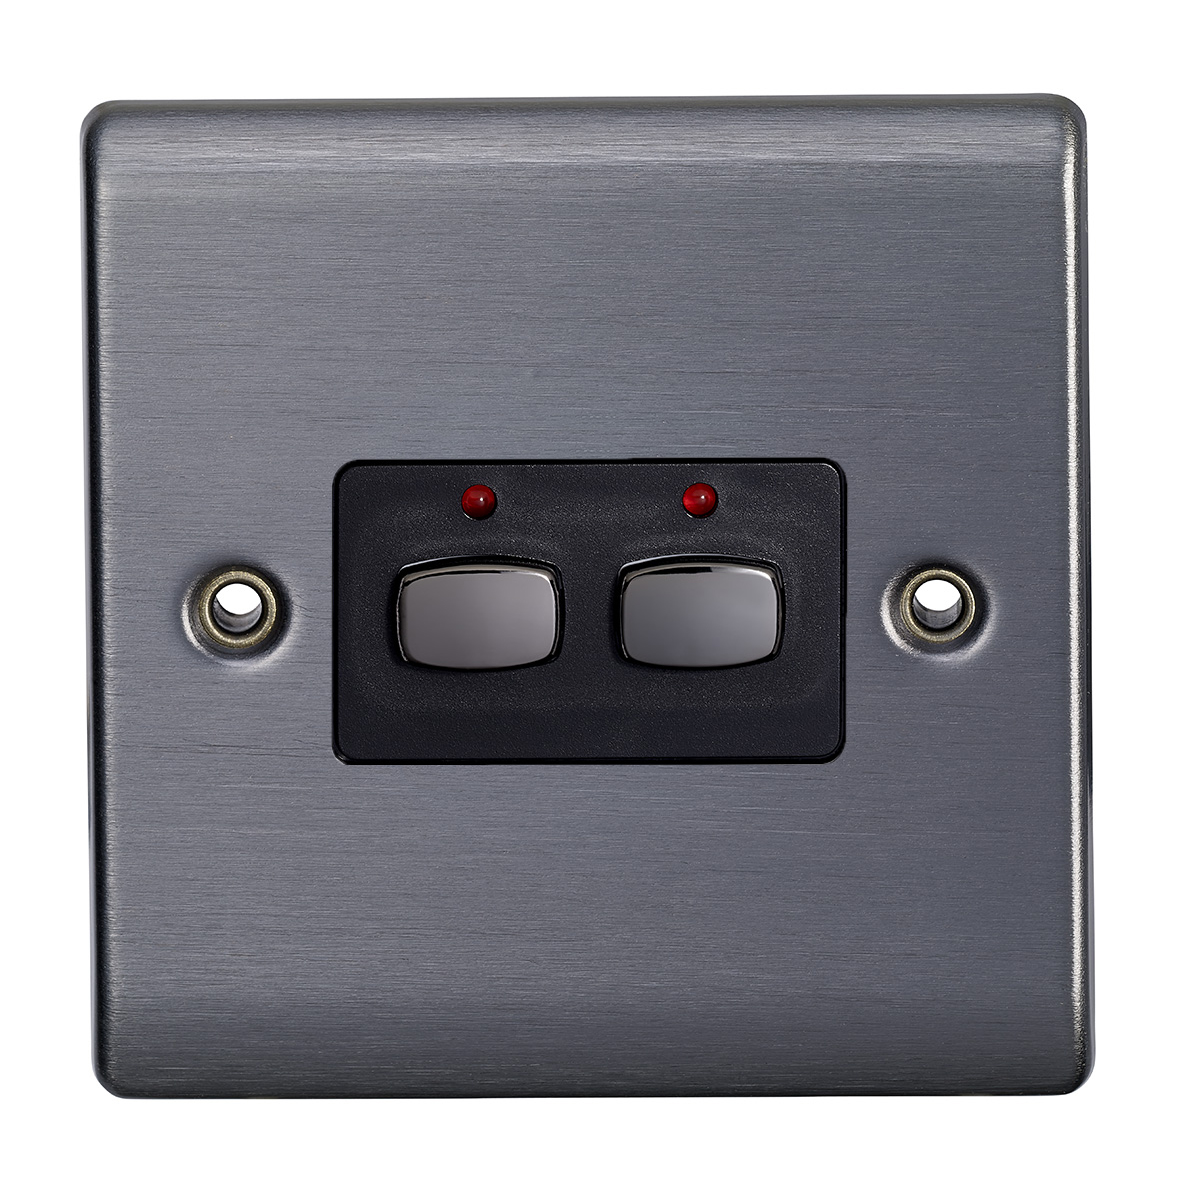 Smart 6mm two gang Light Switch Graphite